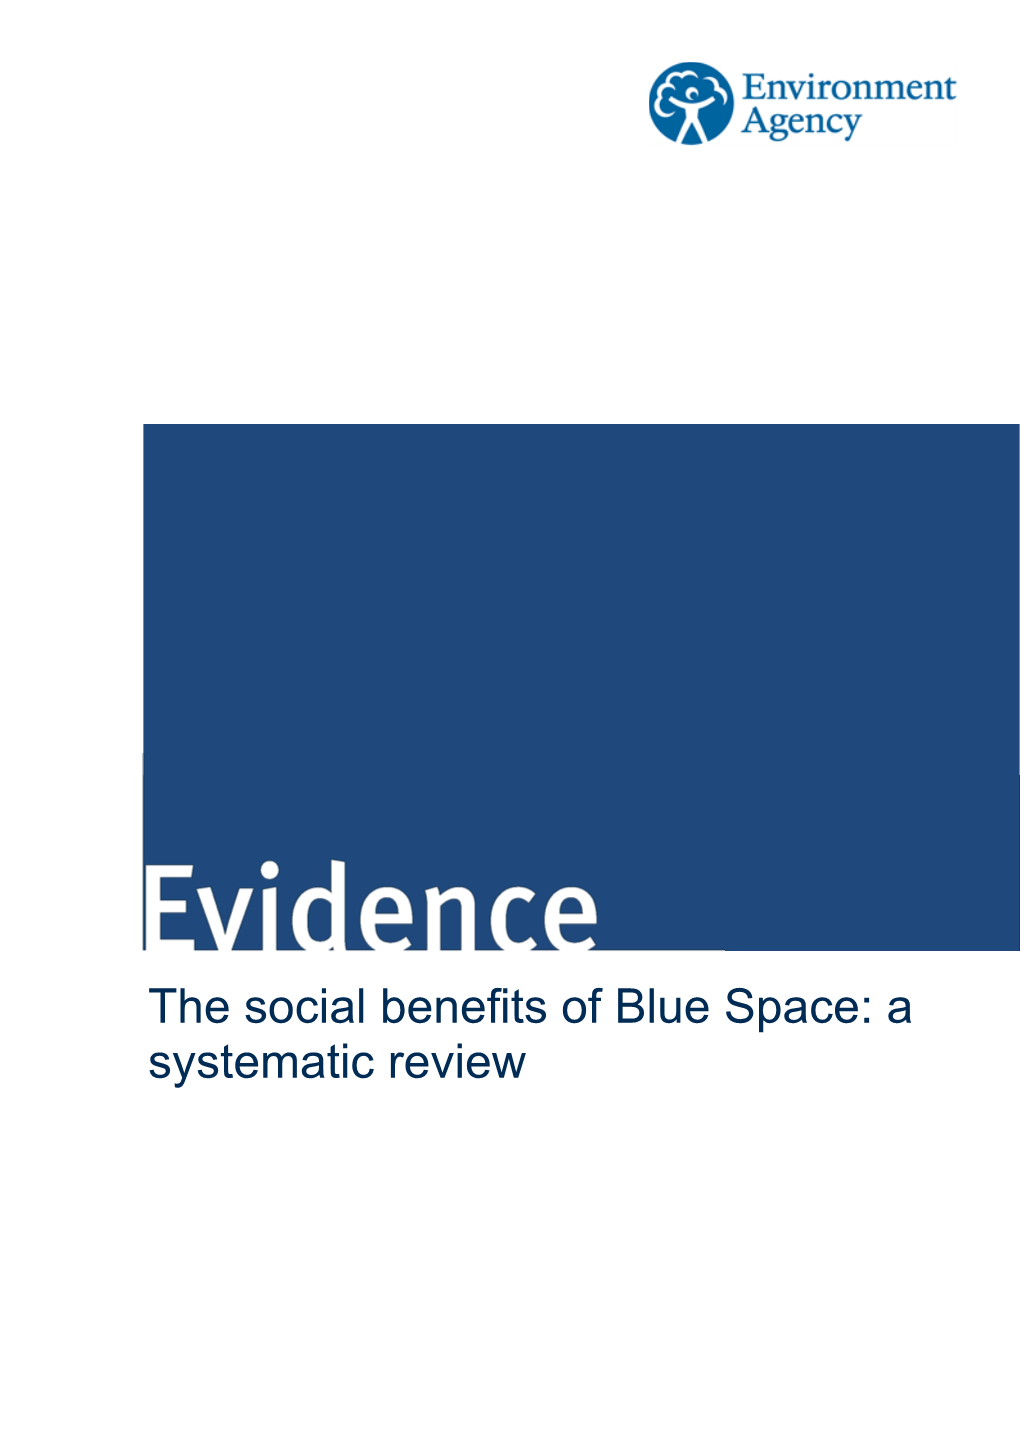 The Social Benefits of Blue Space: a Systematic Review